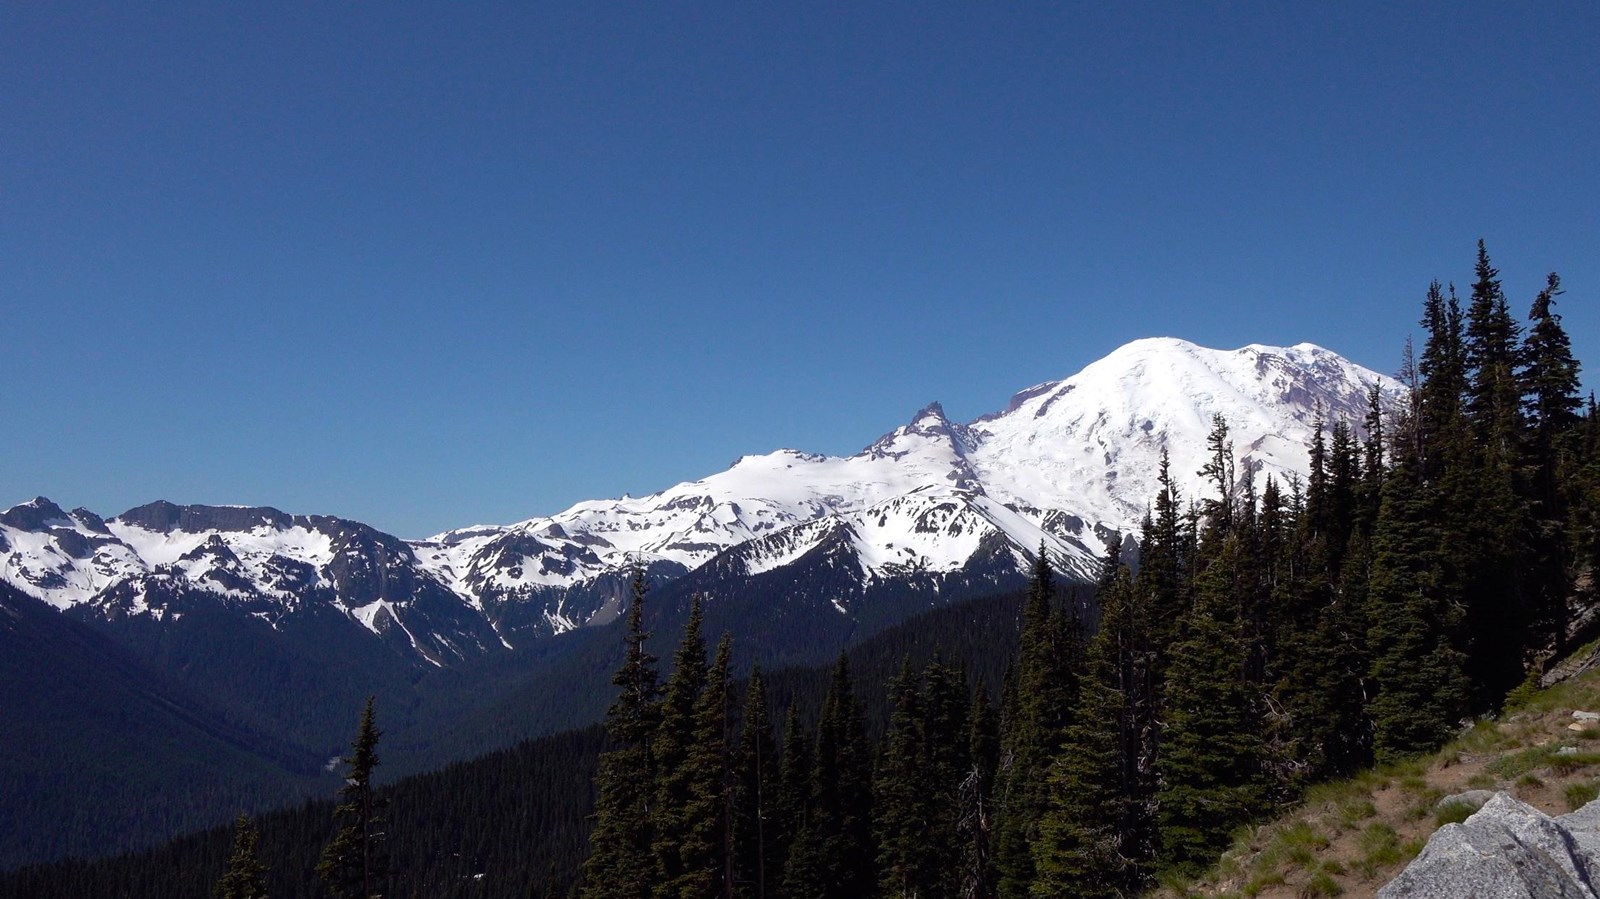 A glaciated mountain and snow-capped ridge line rising above a forested valley.